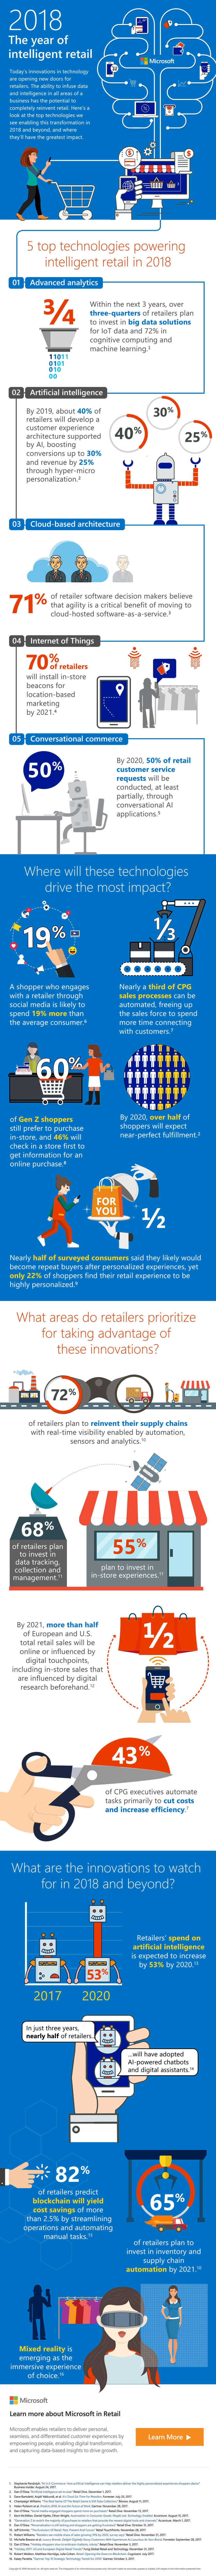 2018 The Year Of Intelligent Retail #Infographic